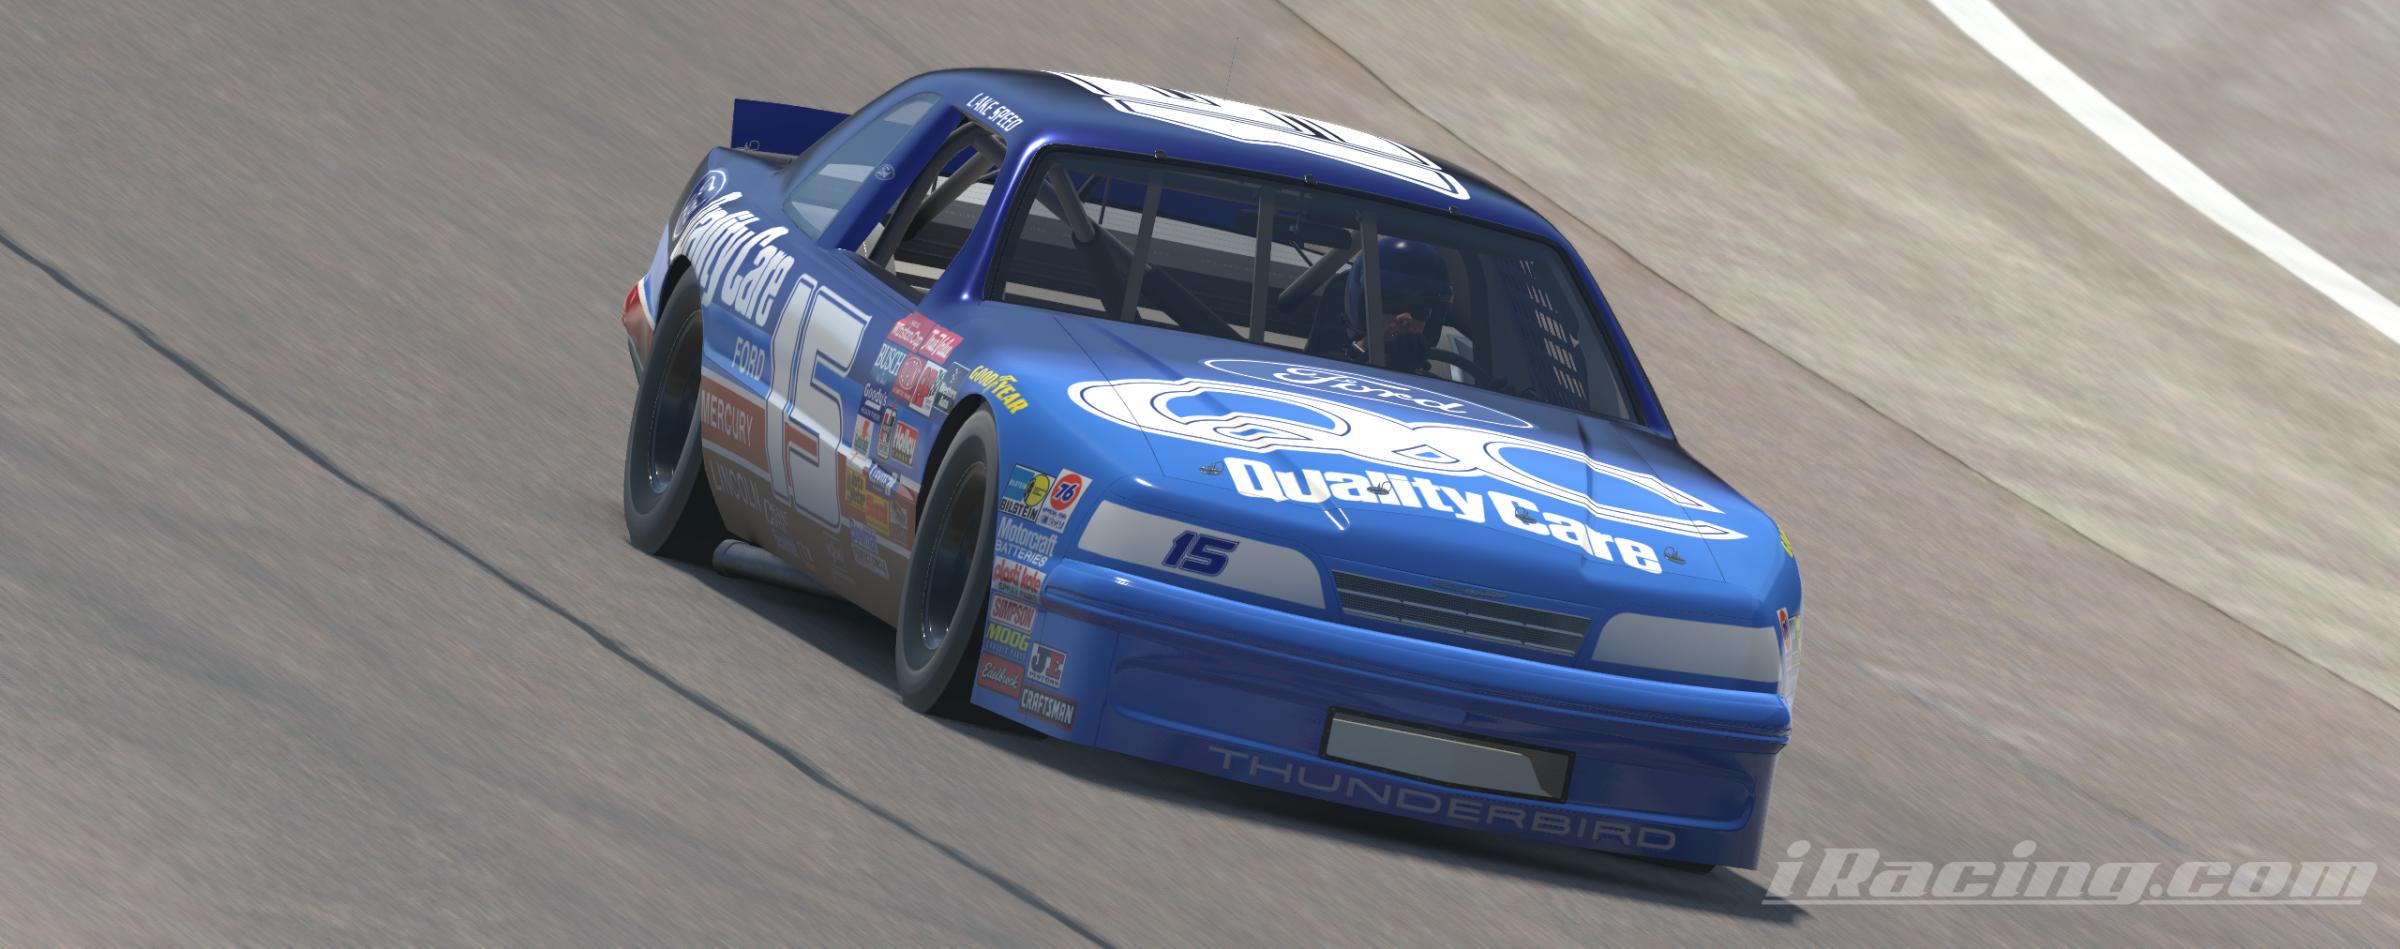 Preview of 1994 #15 Lake Speed Quality Care Ford - Winston Cup by William Goshen